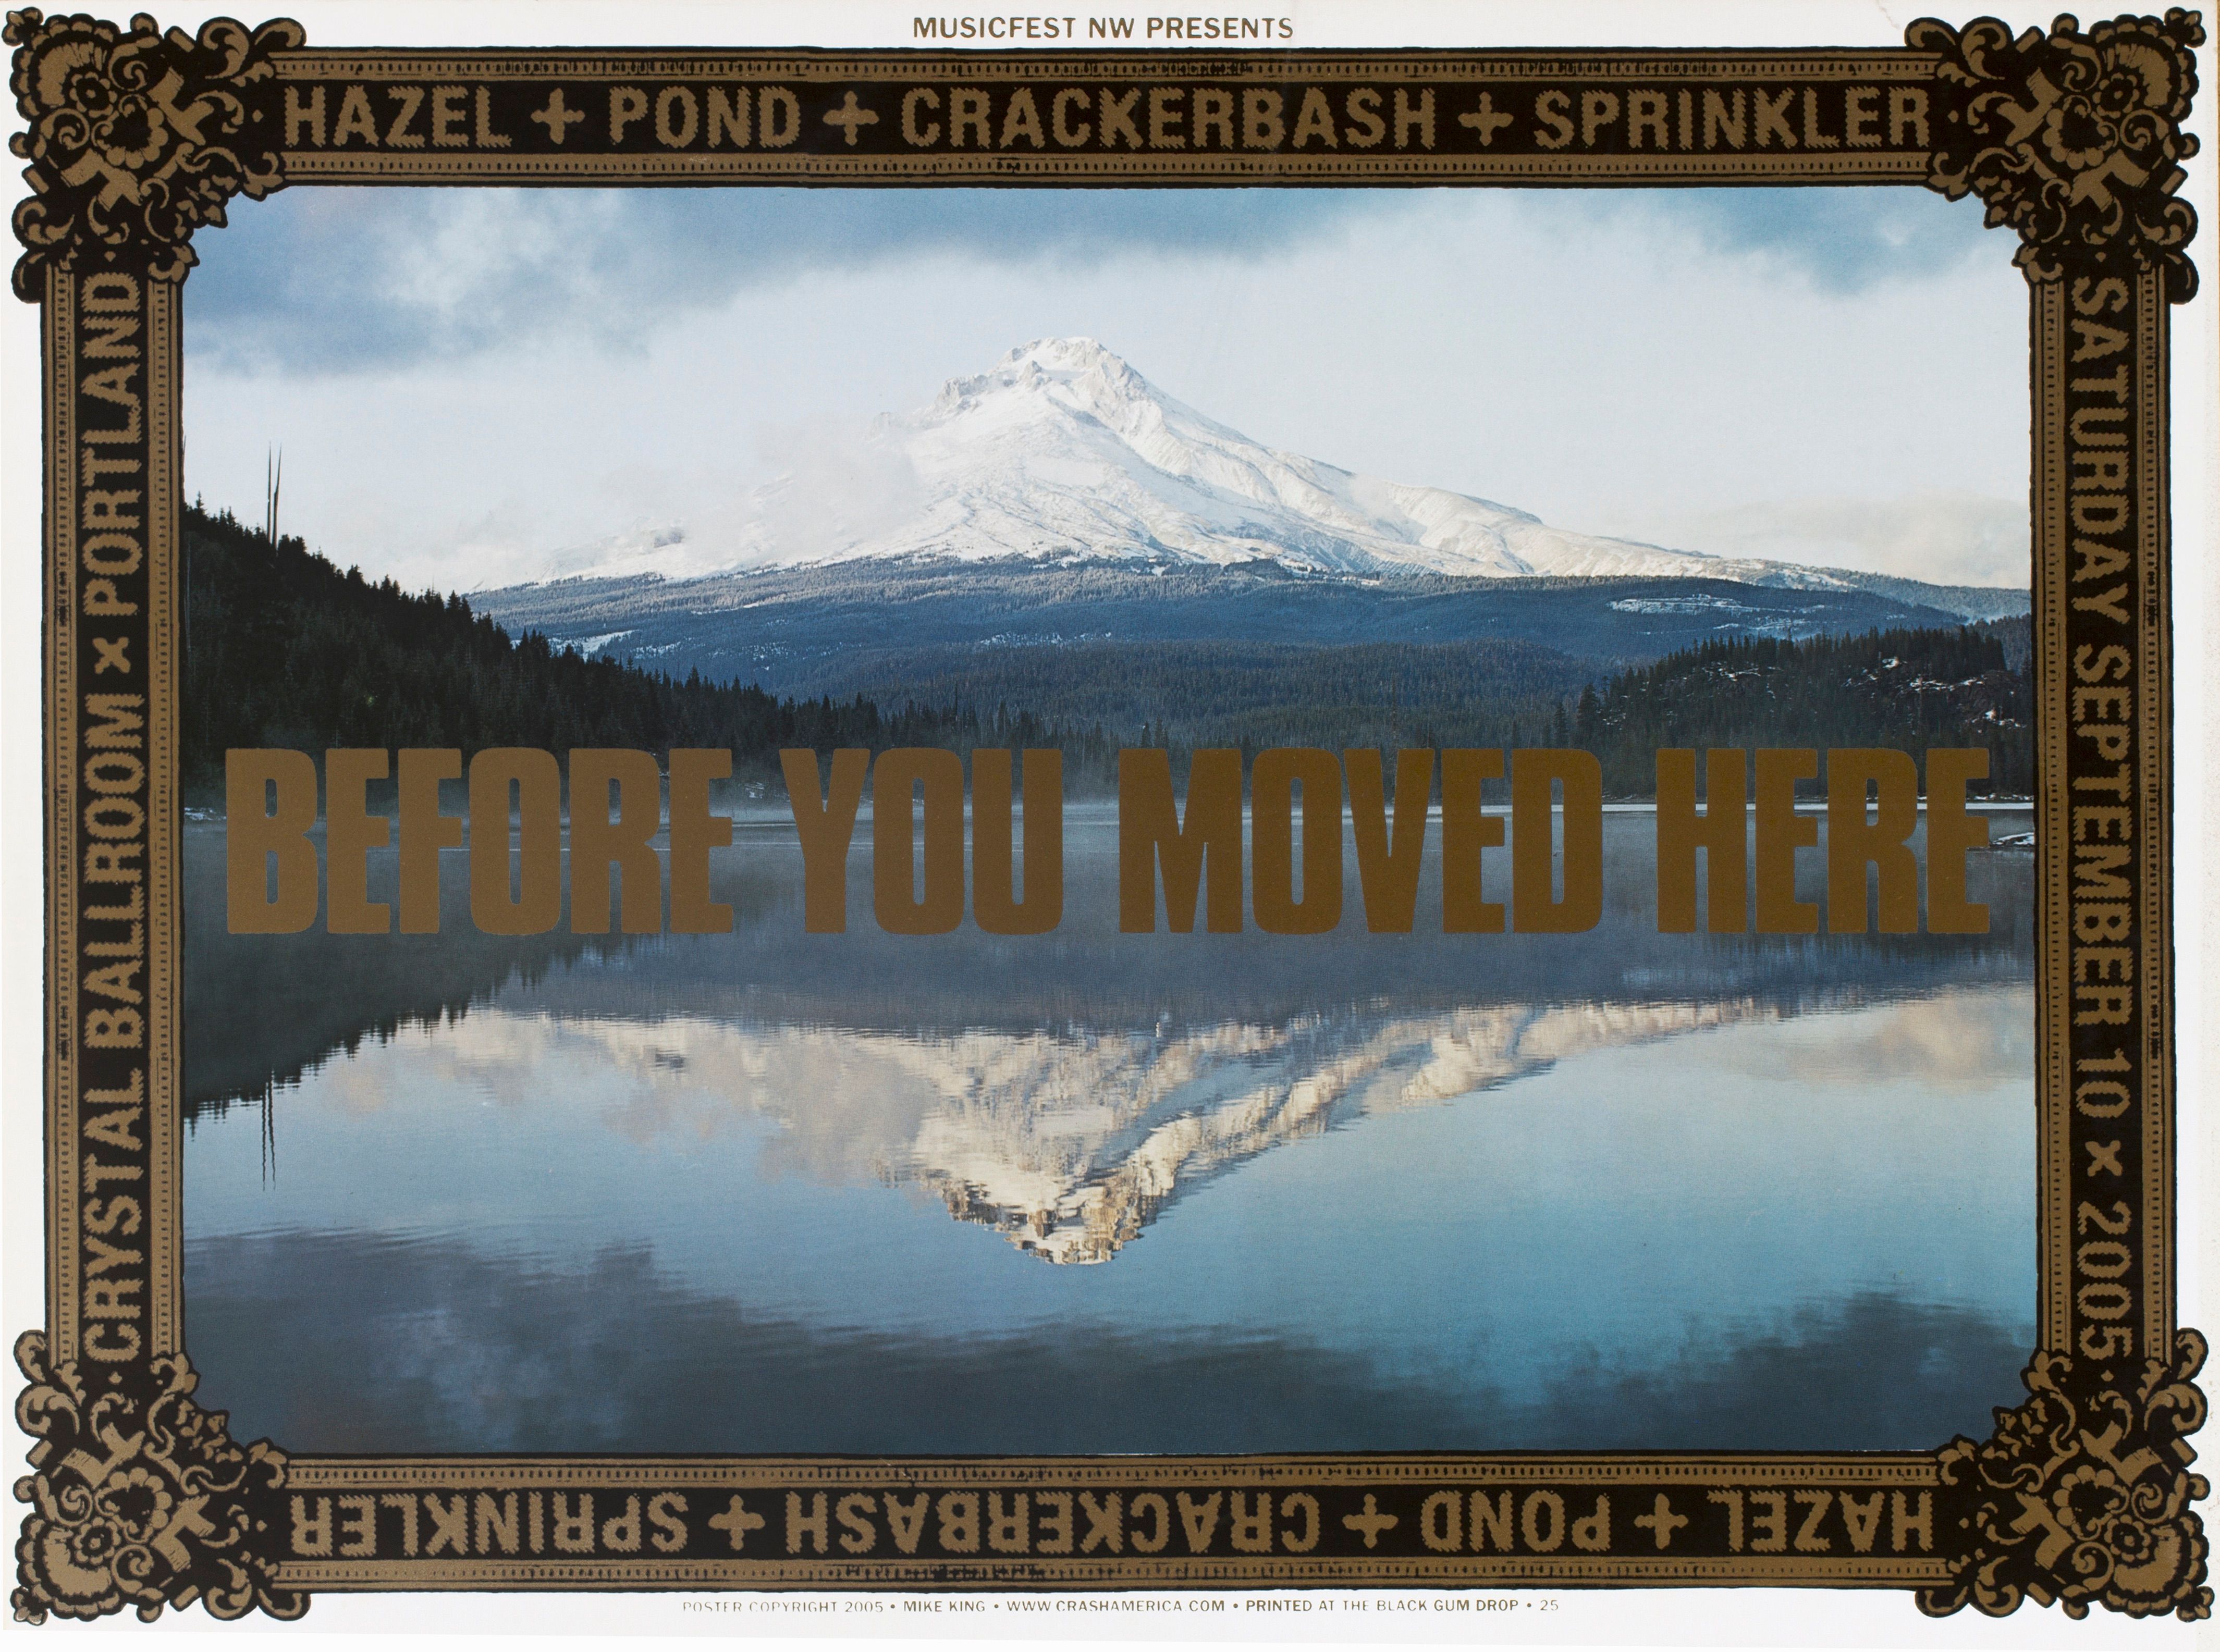 MXP-67.1 Before You Moved Here 2005 Crystal Ballroom  Sep 10 Concert Poster